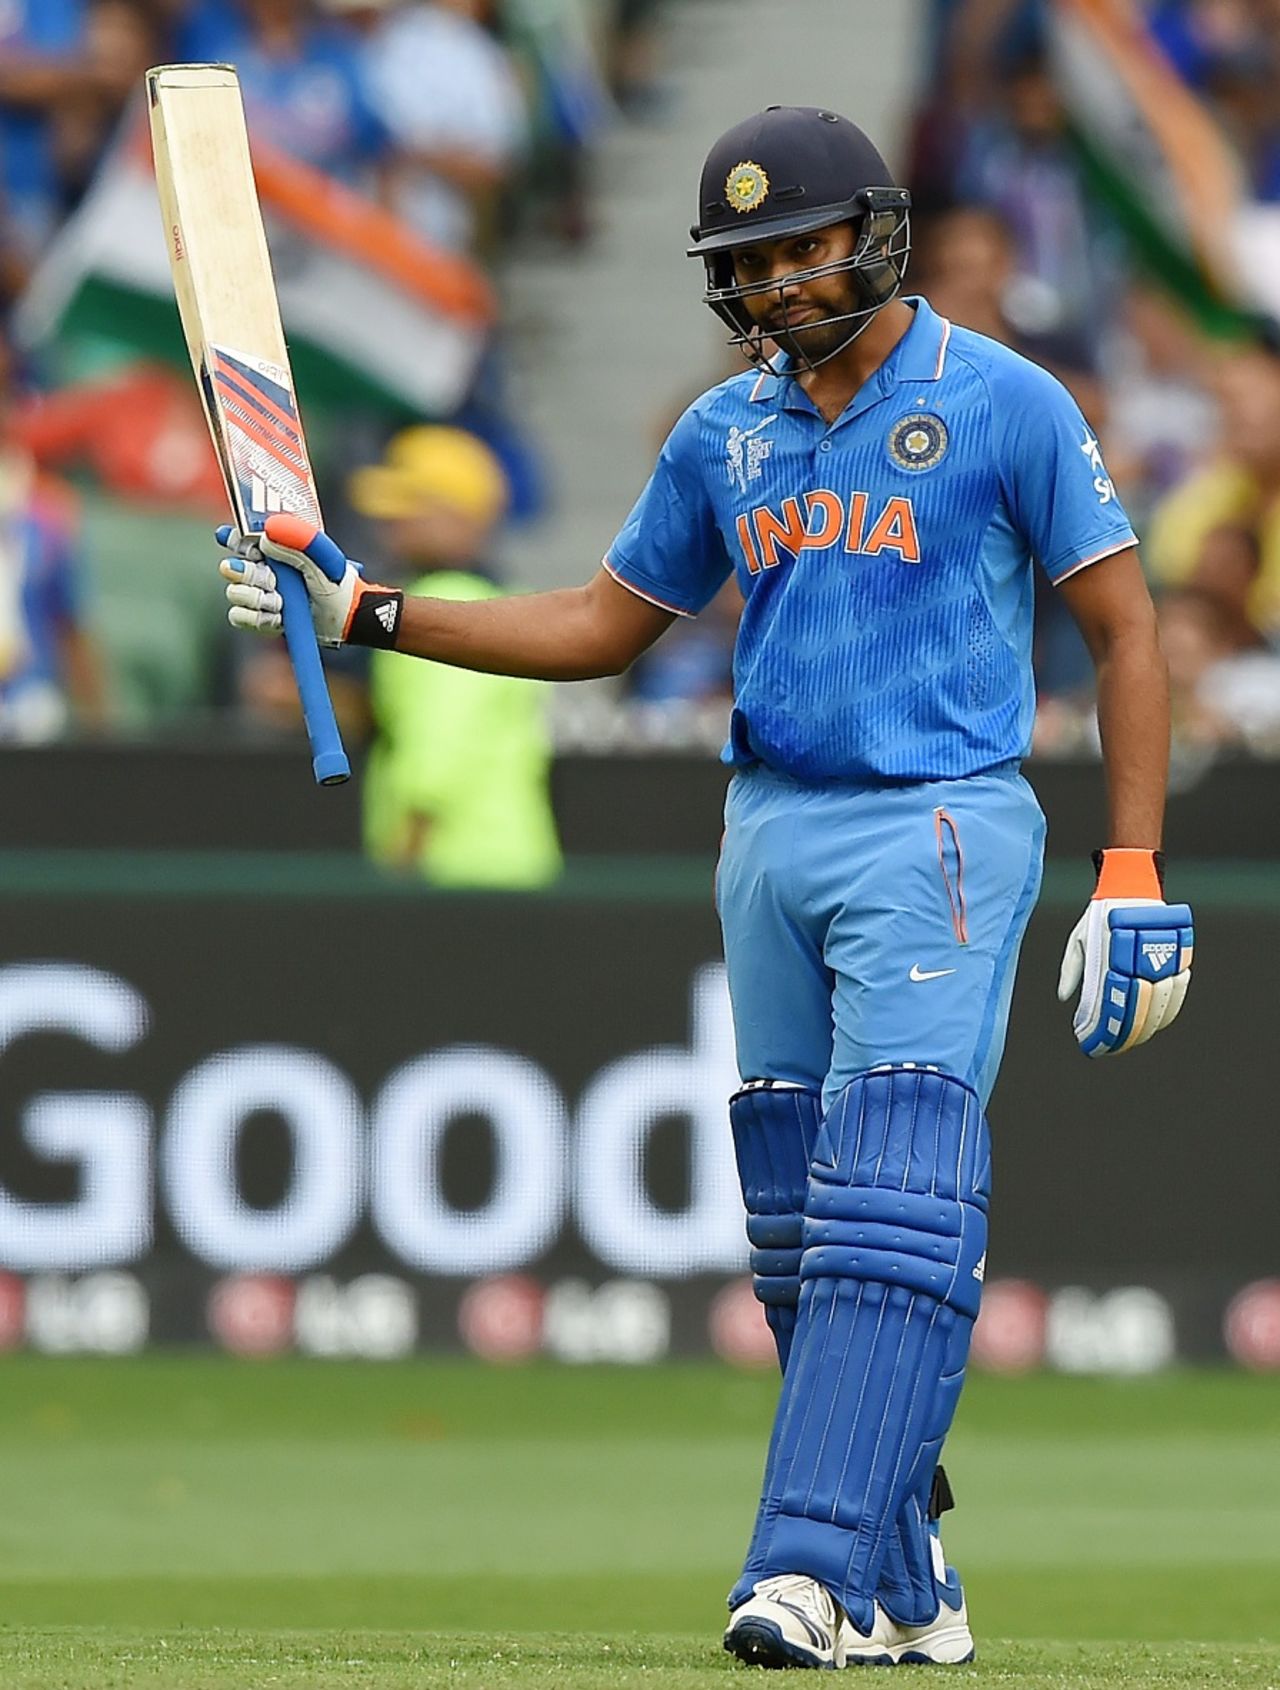 Rohit Sharma acknowledges the crowd after completing his fifty, Bangladesh v India, World Cup 2015, 2nd quarter-final, Melbourne, March 19, 2015